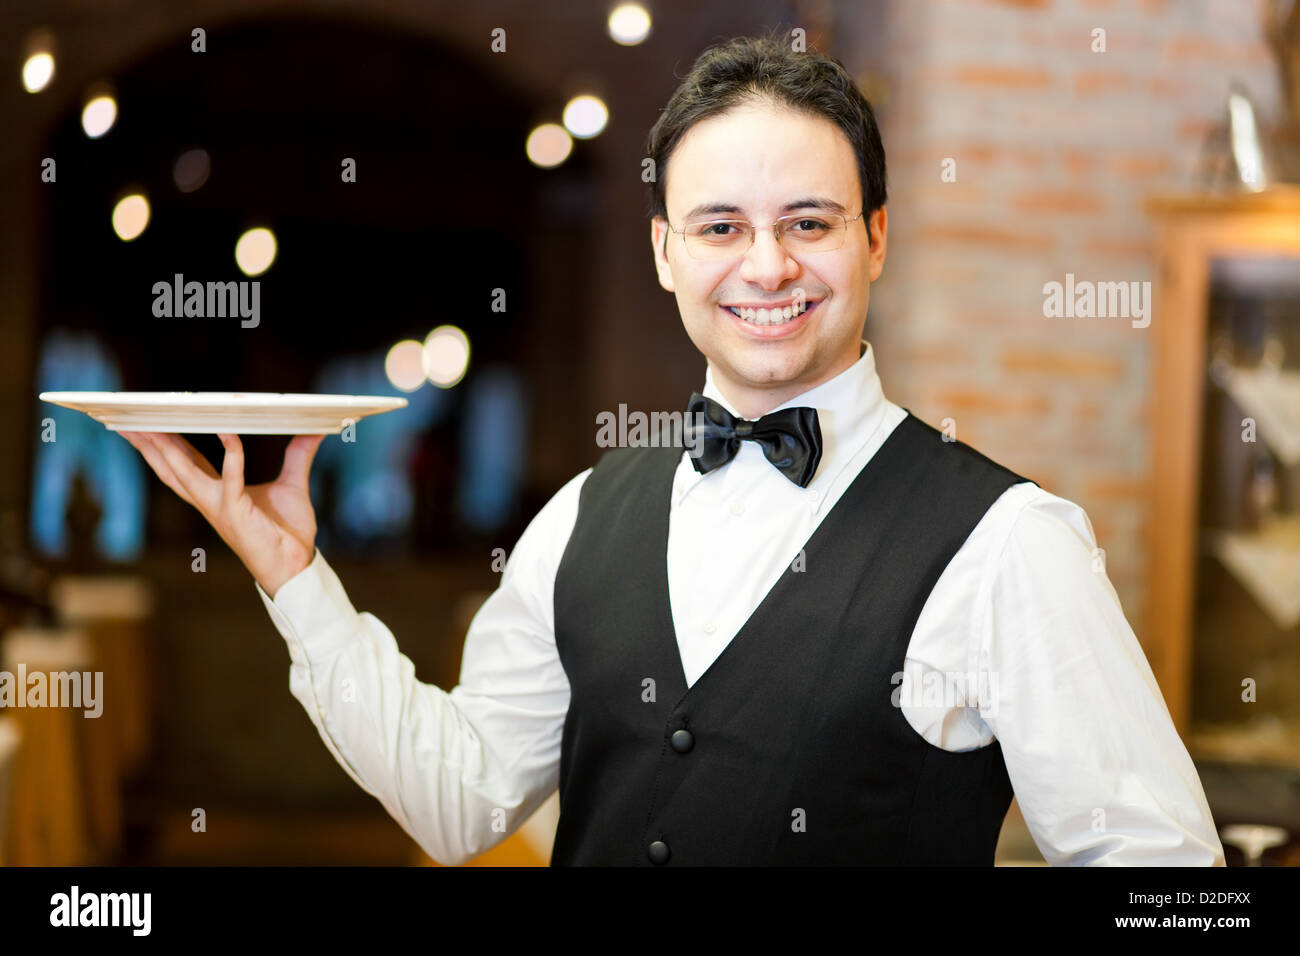 Waiter holding a plate Stock Photo